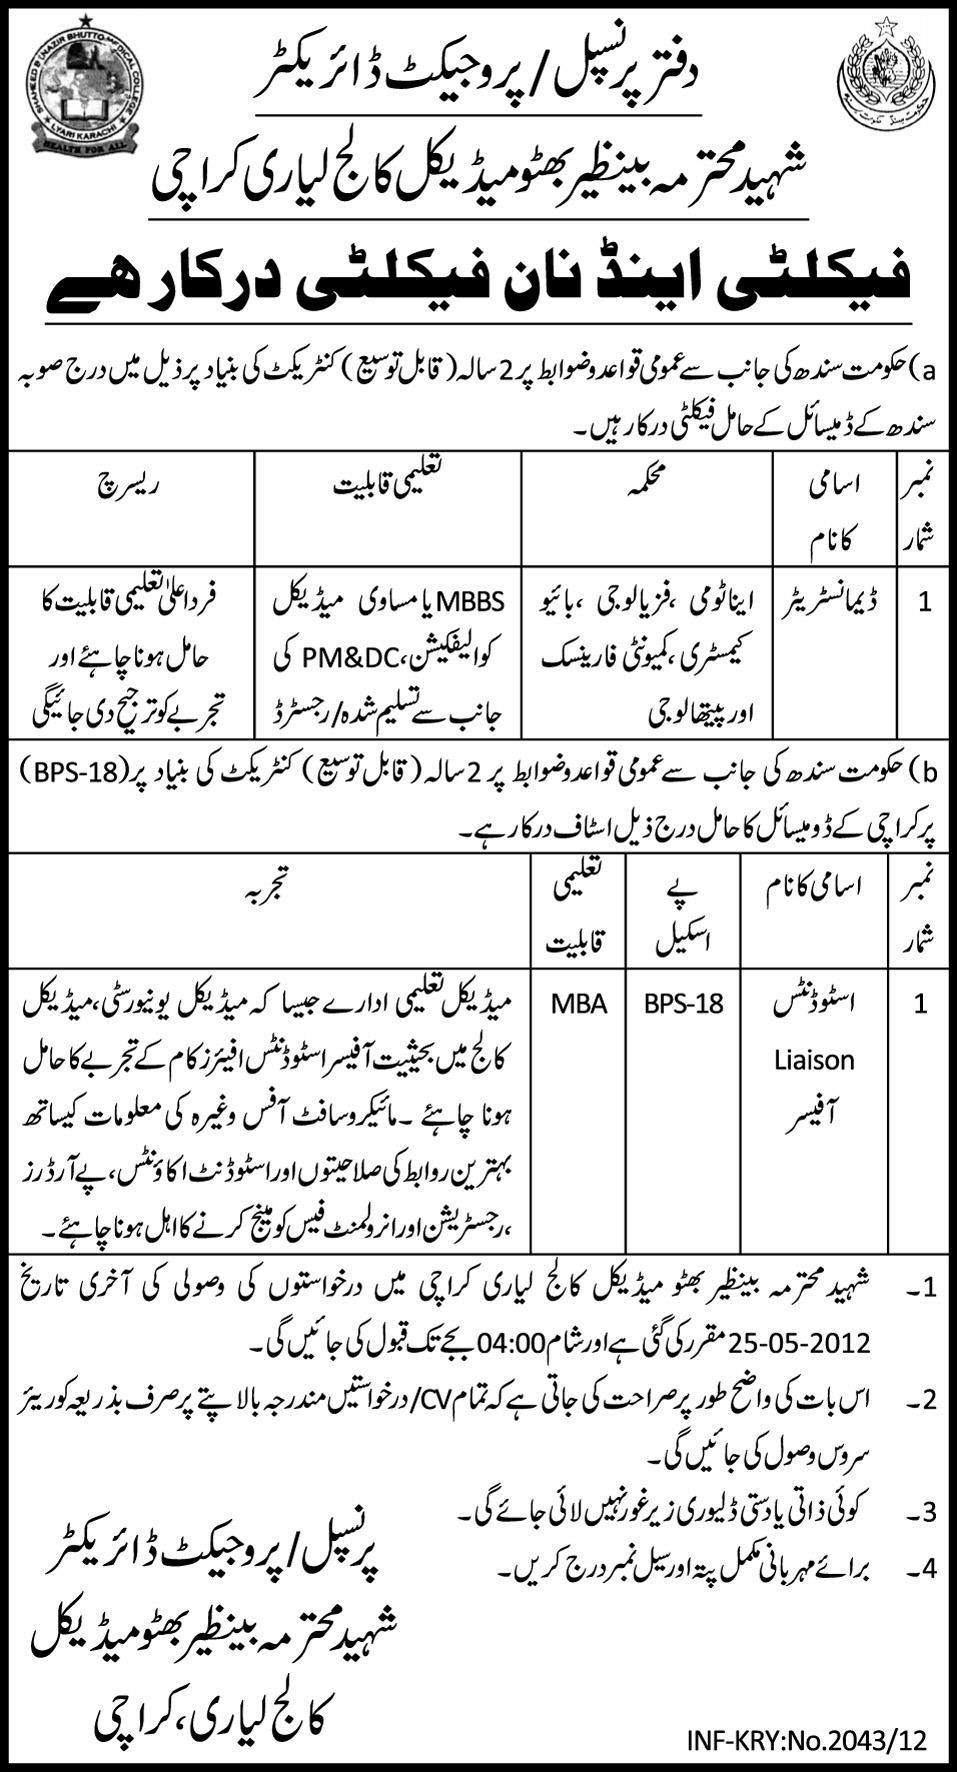 Faculty and Non-Faculty Required at Shaheed Mohtarma Benazir Bhutto Medical College